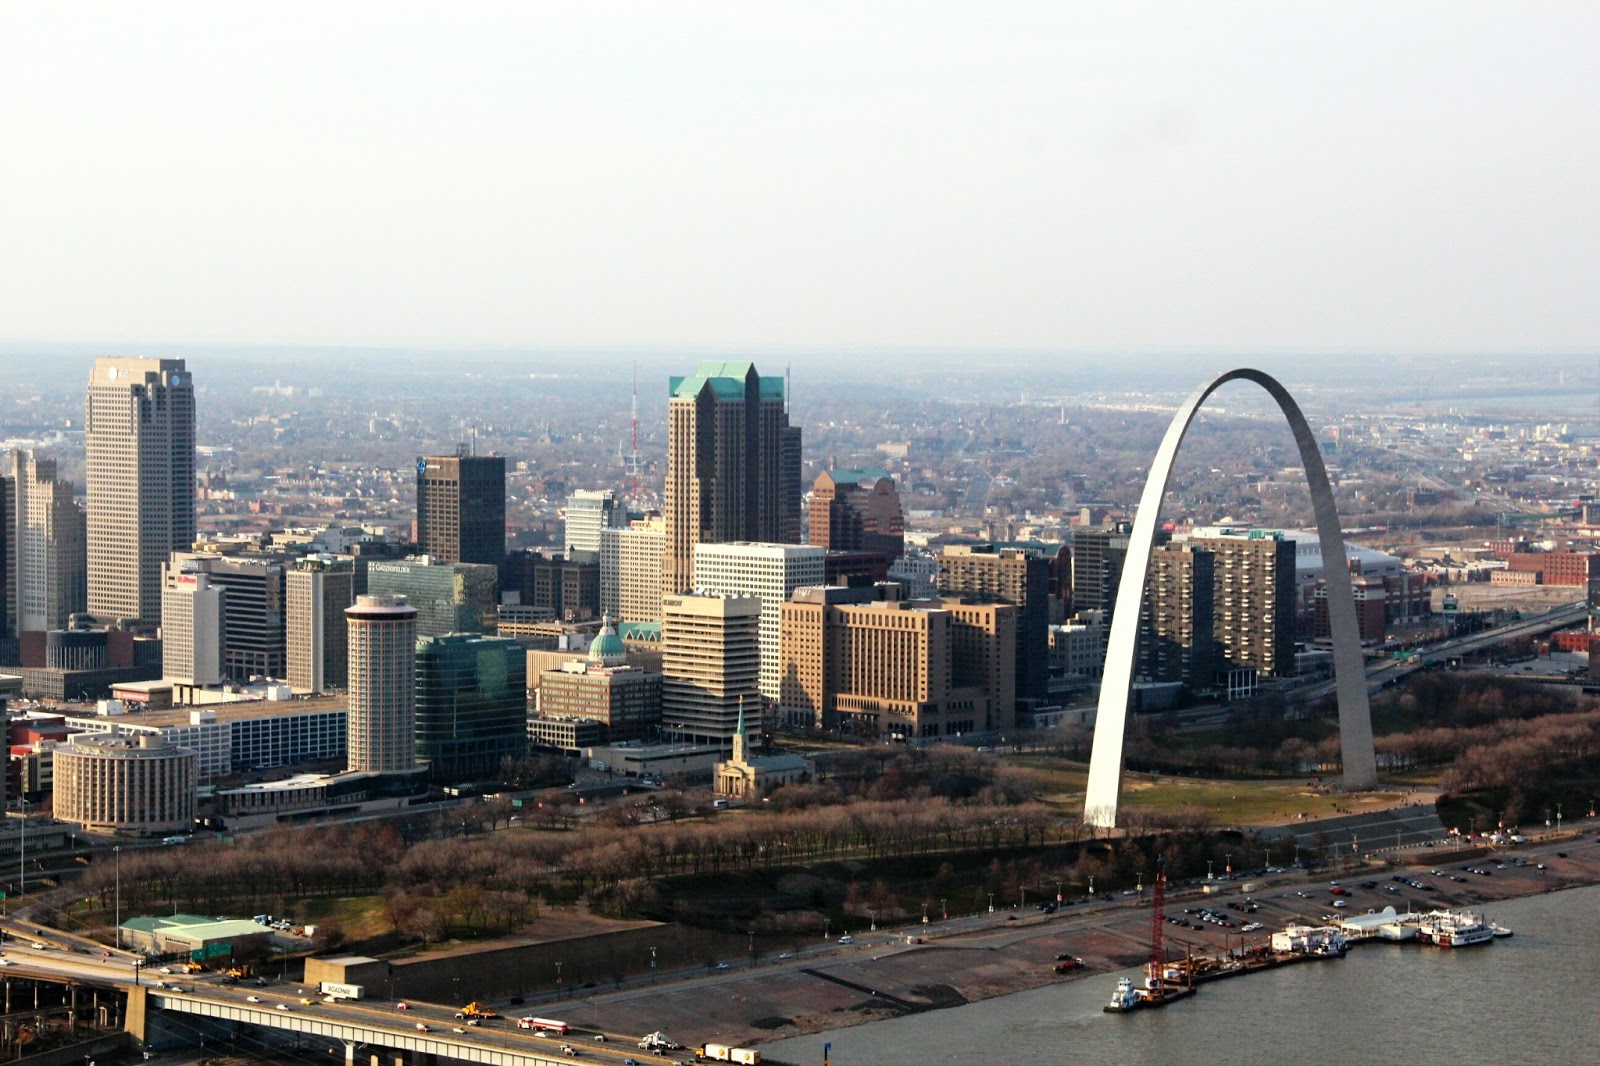 Helicopter Ride over Downtown St. Louis